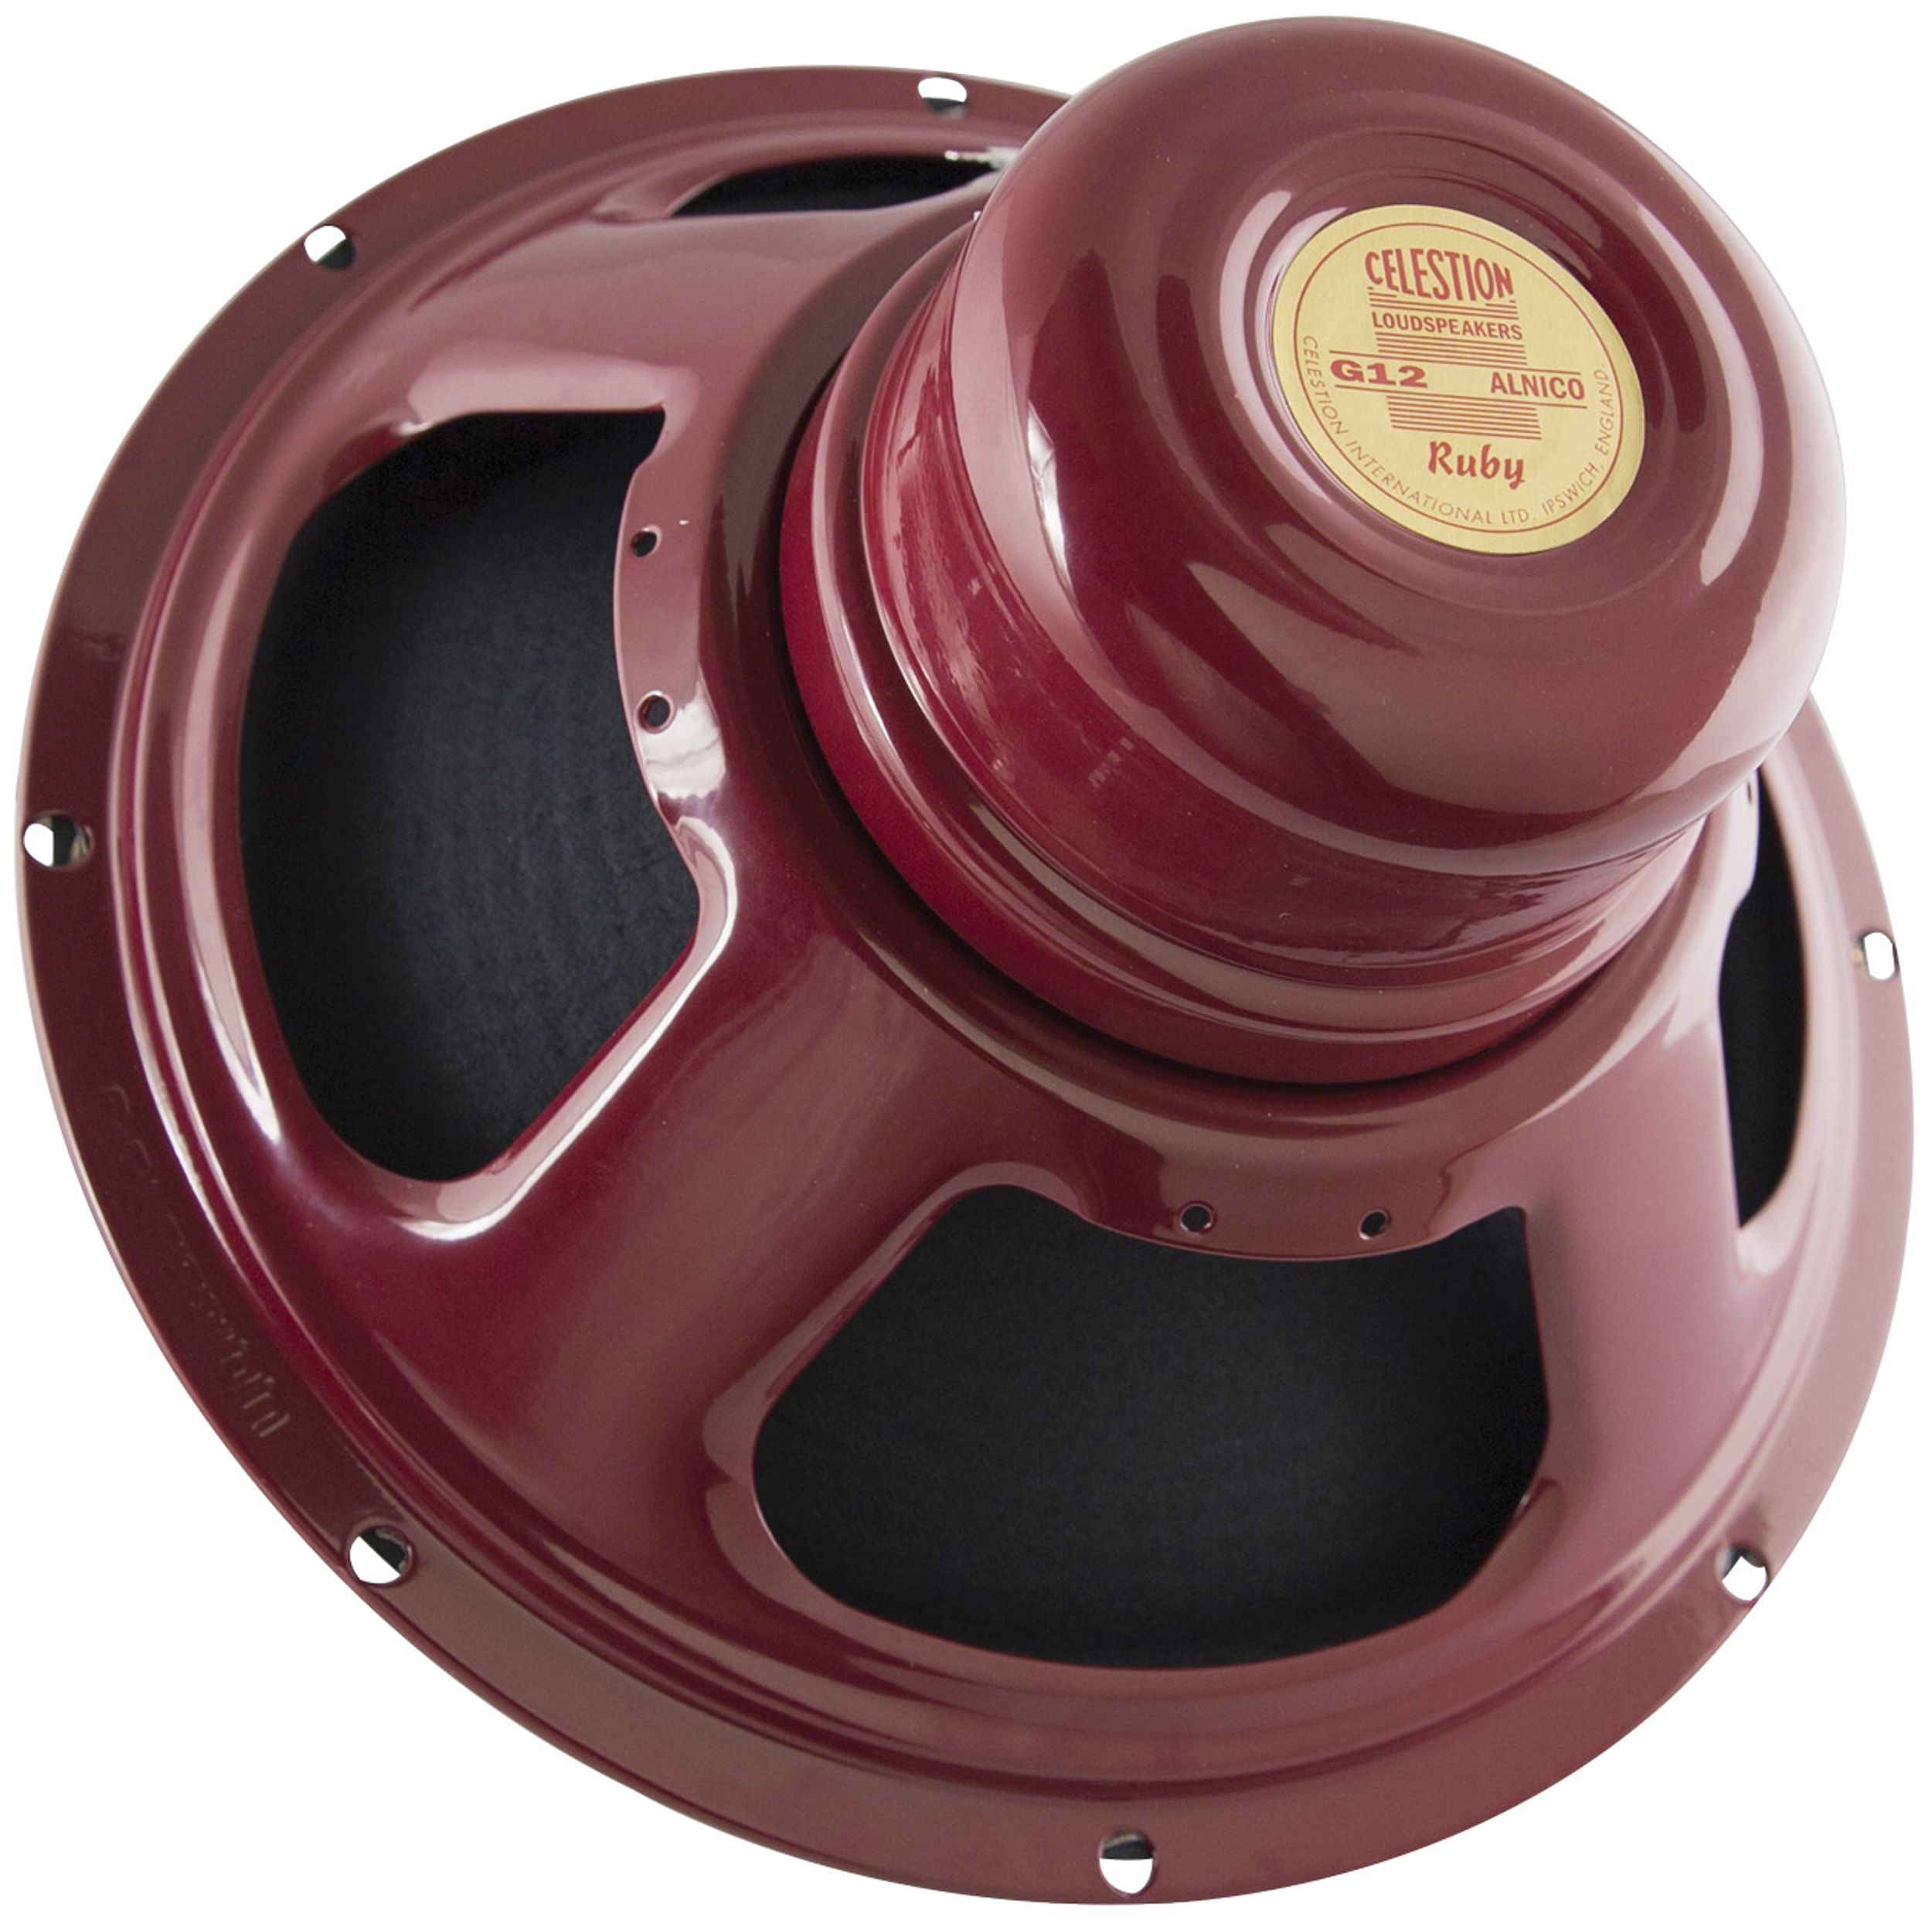 Quick Hit: Celestion Ruby Review